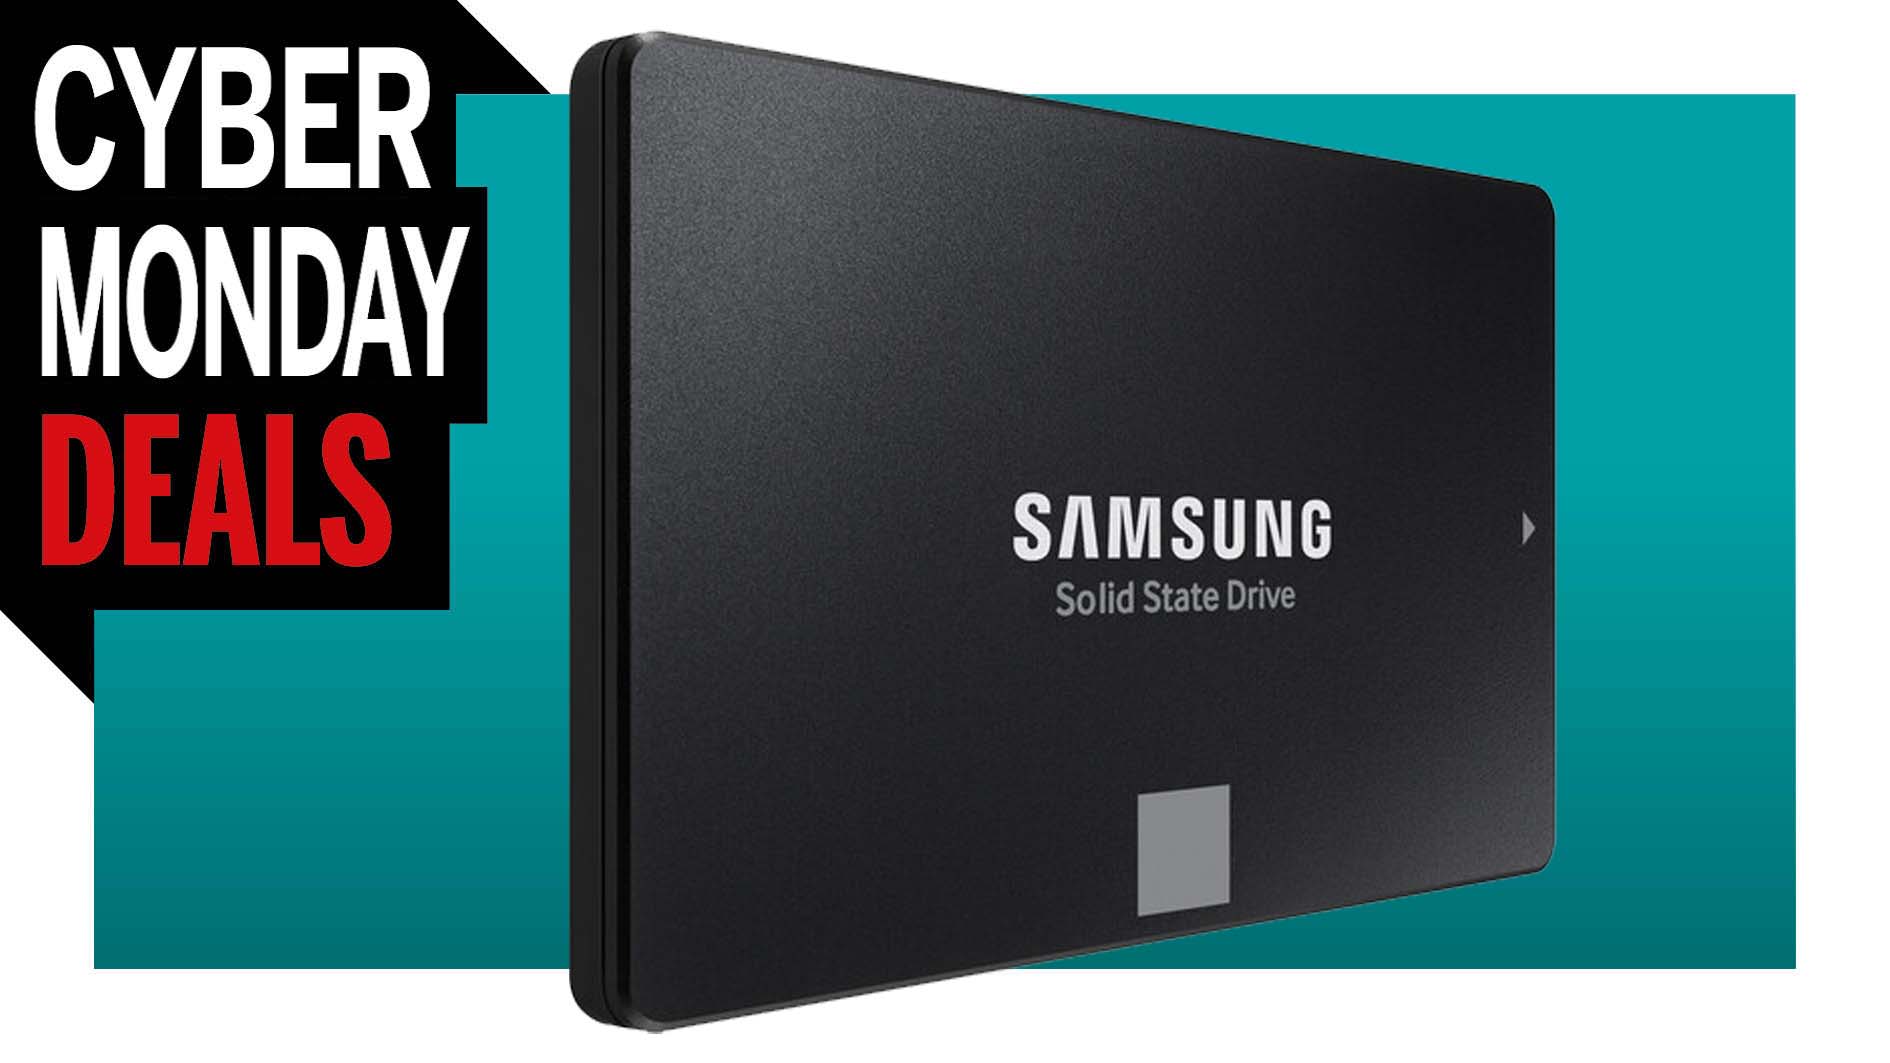 inzet Productiviteit bodem Cyber Monday SSD deal: get Samsung's 500GB 870 Evo for just $60 | PC Gamer